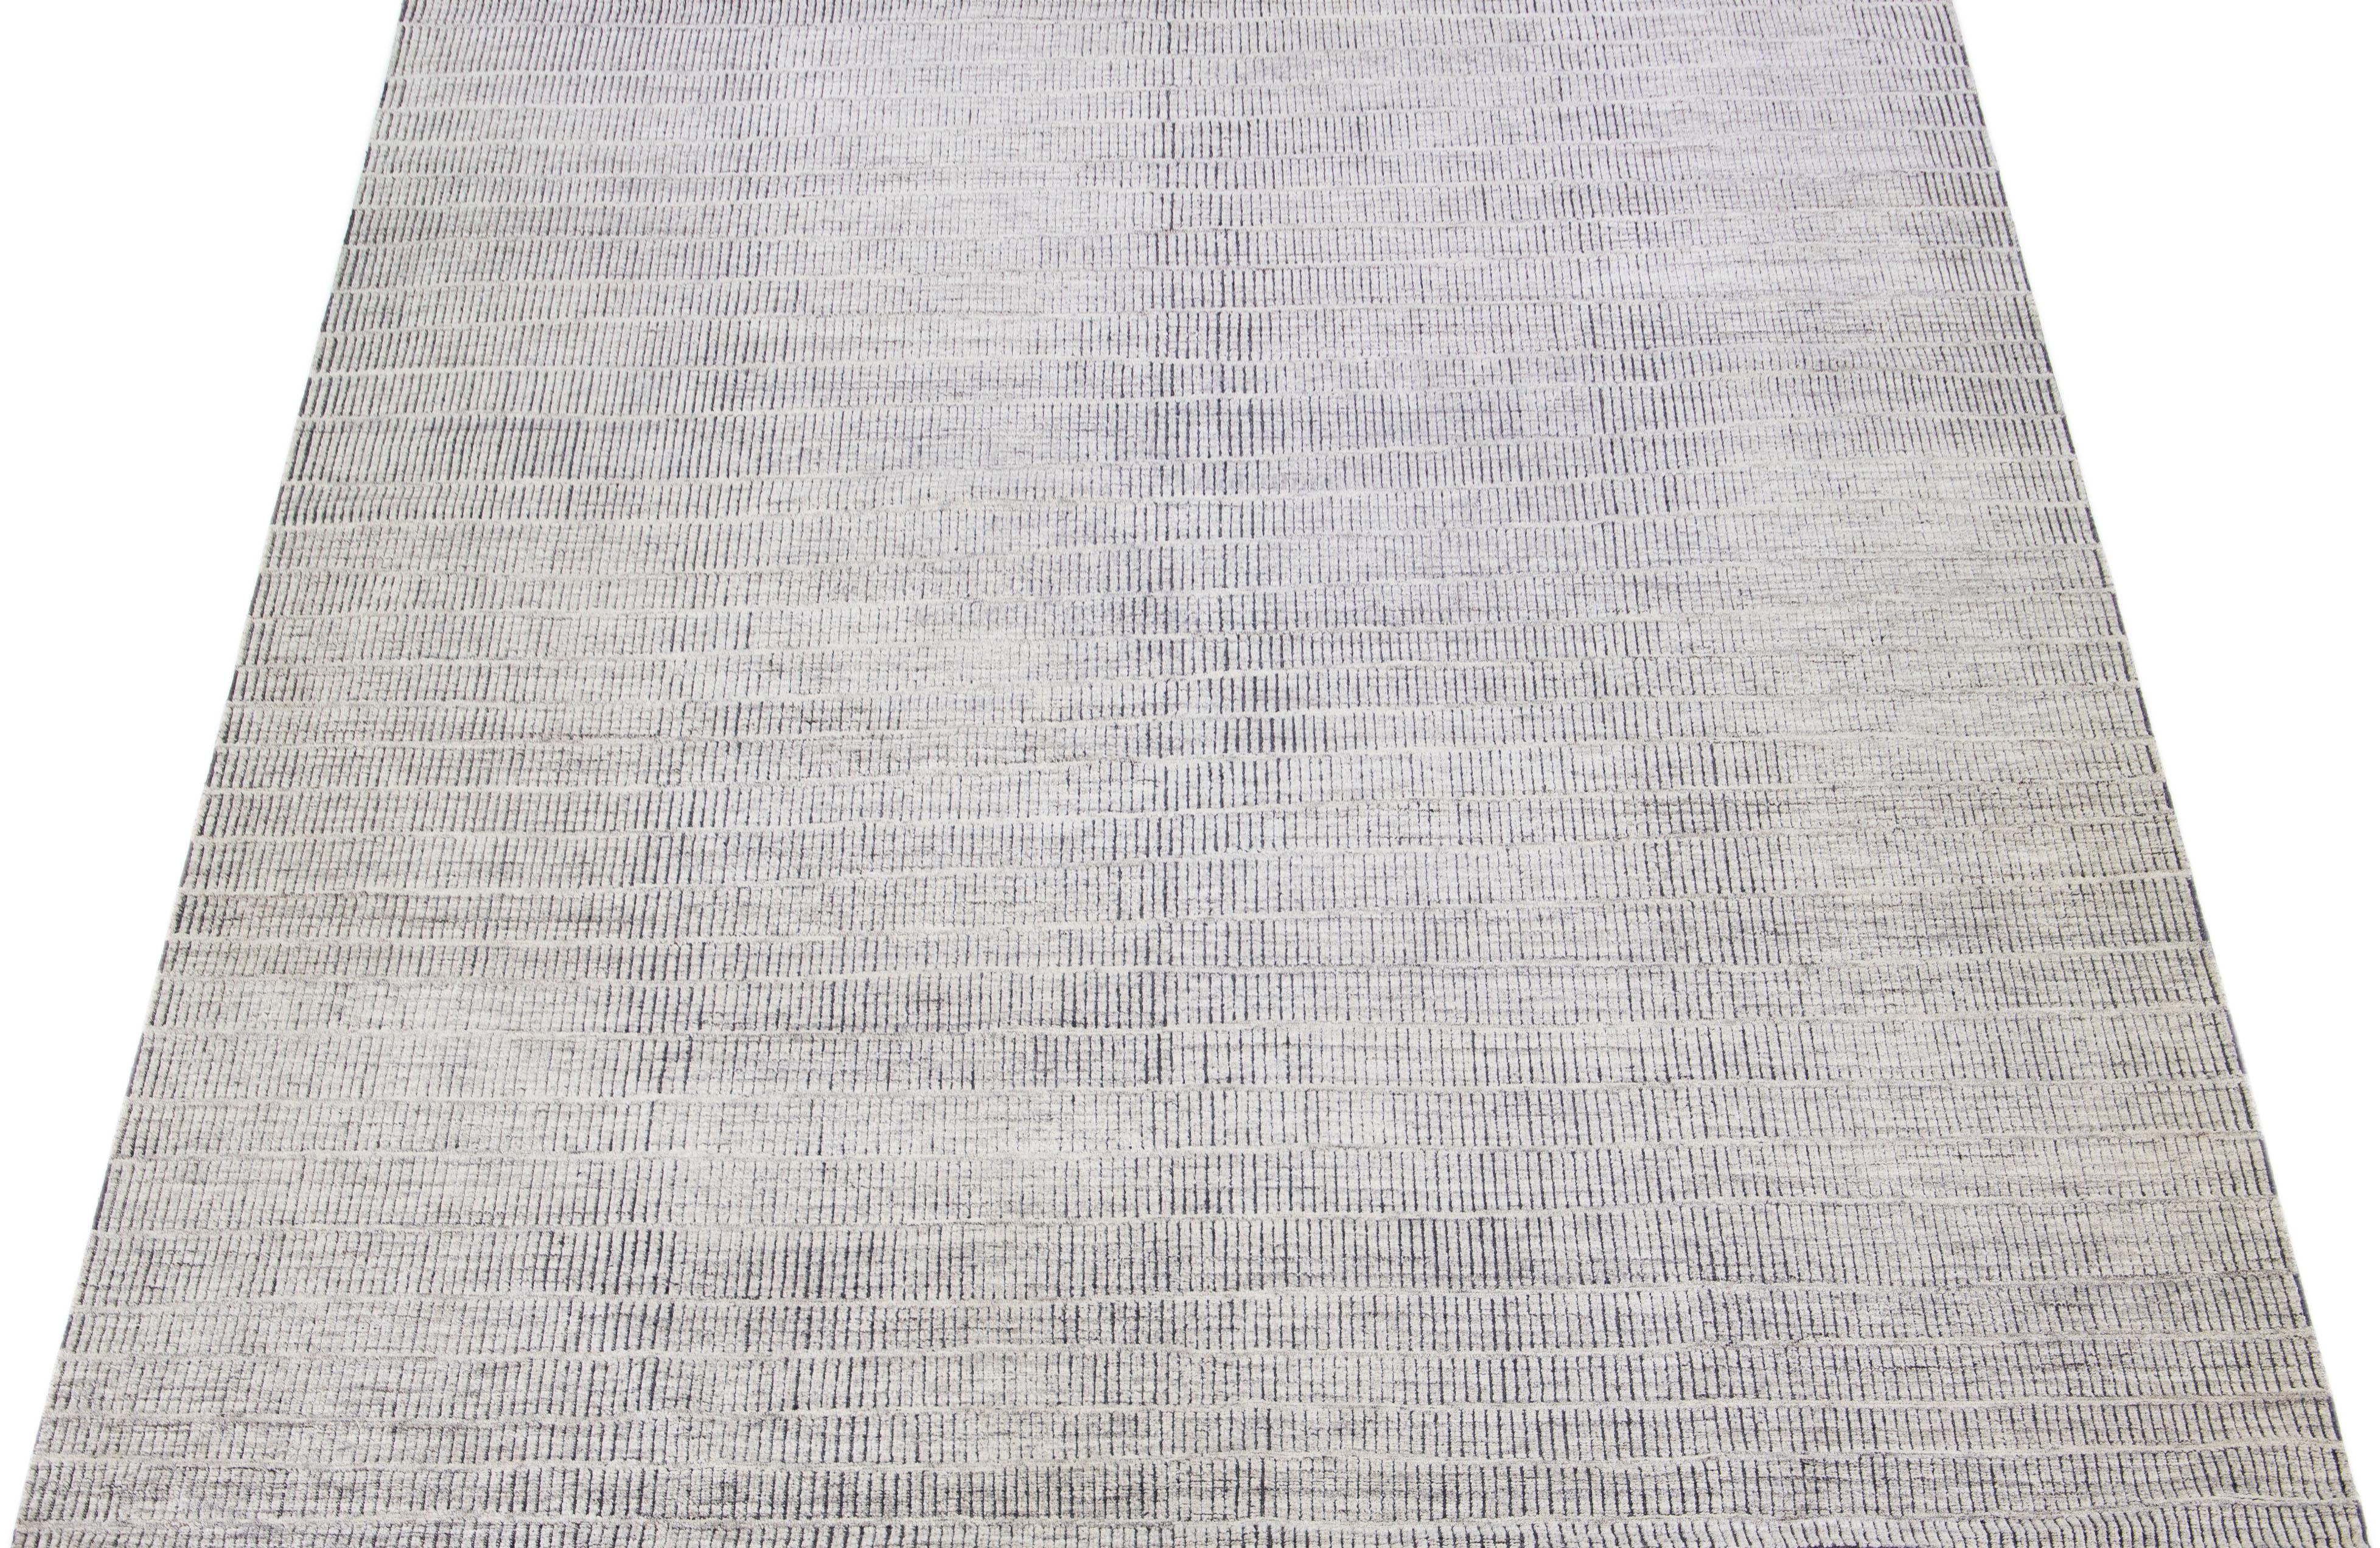 Beautiful modern Moroccan-style hand-knotted wool rug with a light gray color field. This rug is part of our Apadana's Safi Collection and features a minimalist design in dark gray.

This rug measures: 12'3